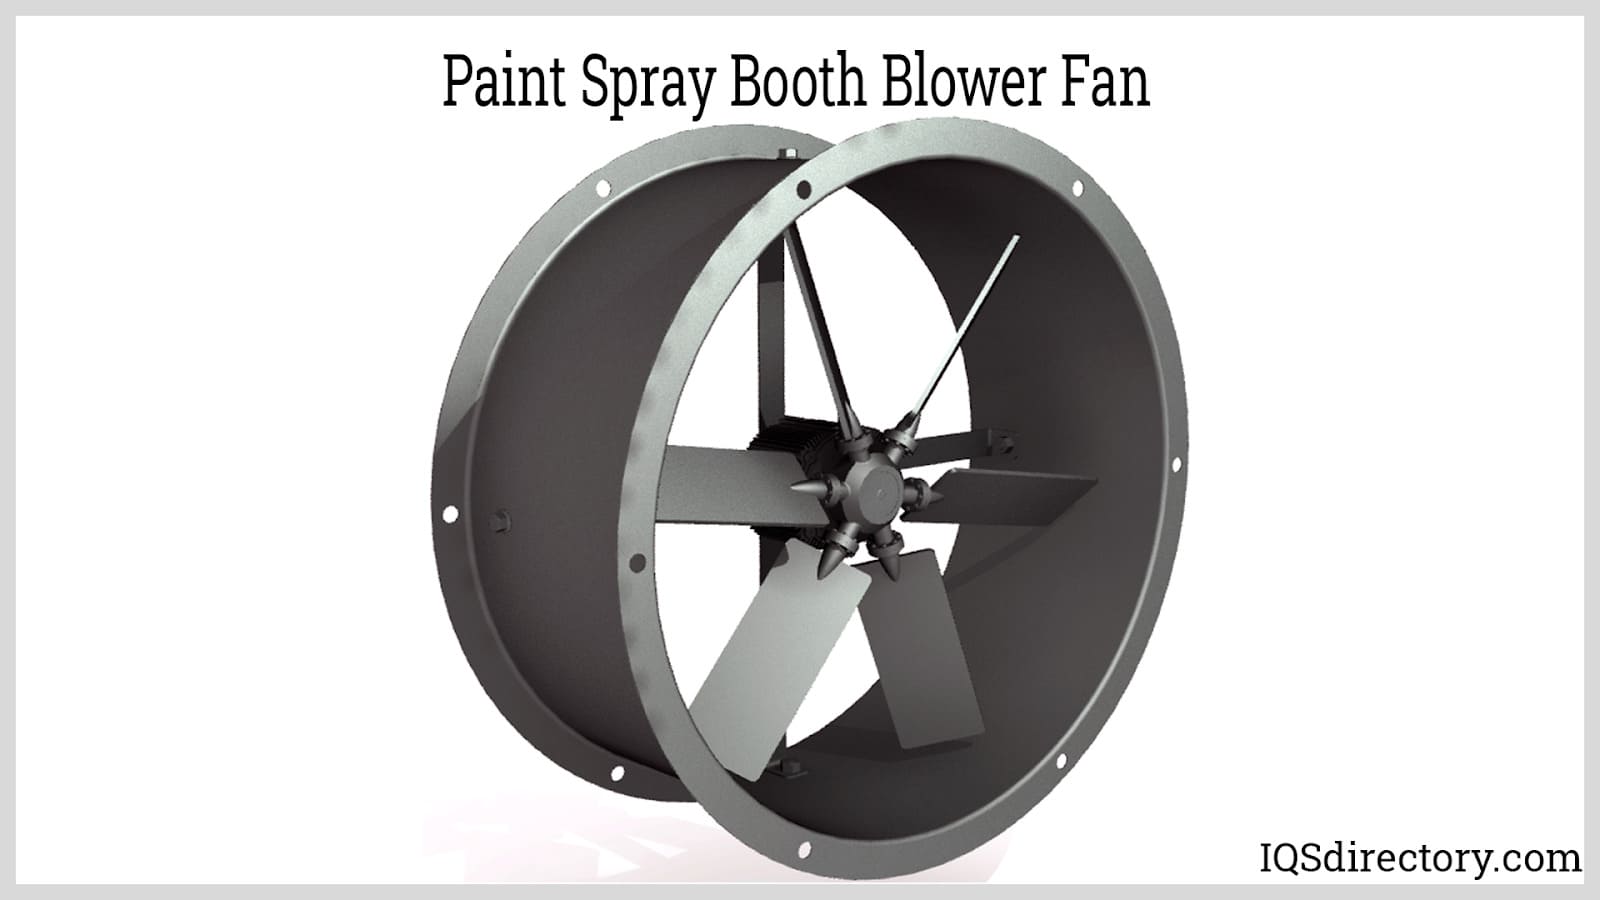 Paint Spray Booth Blower